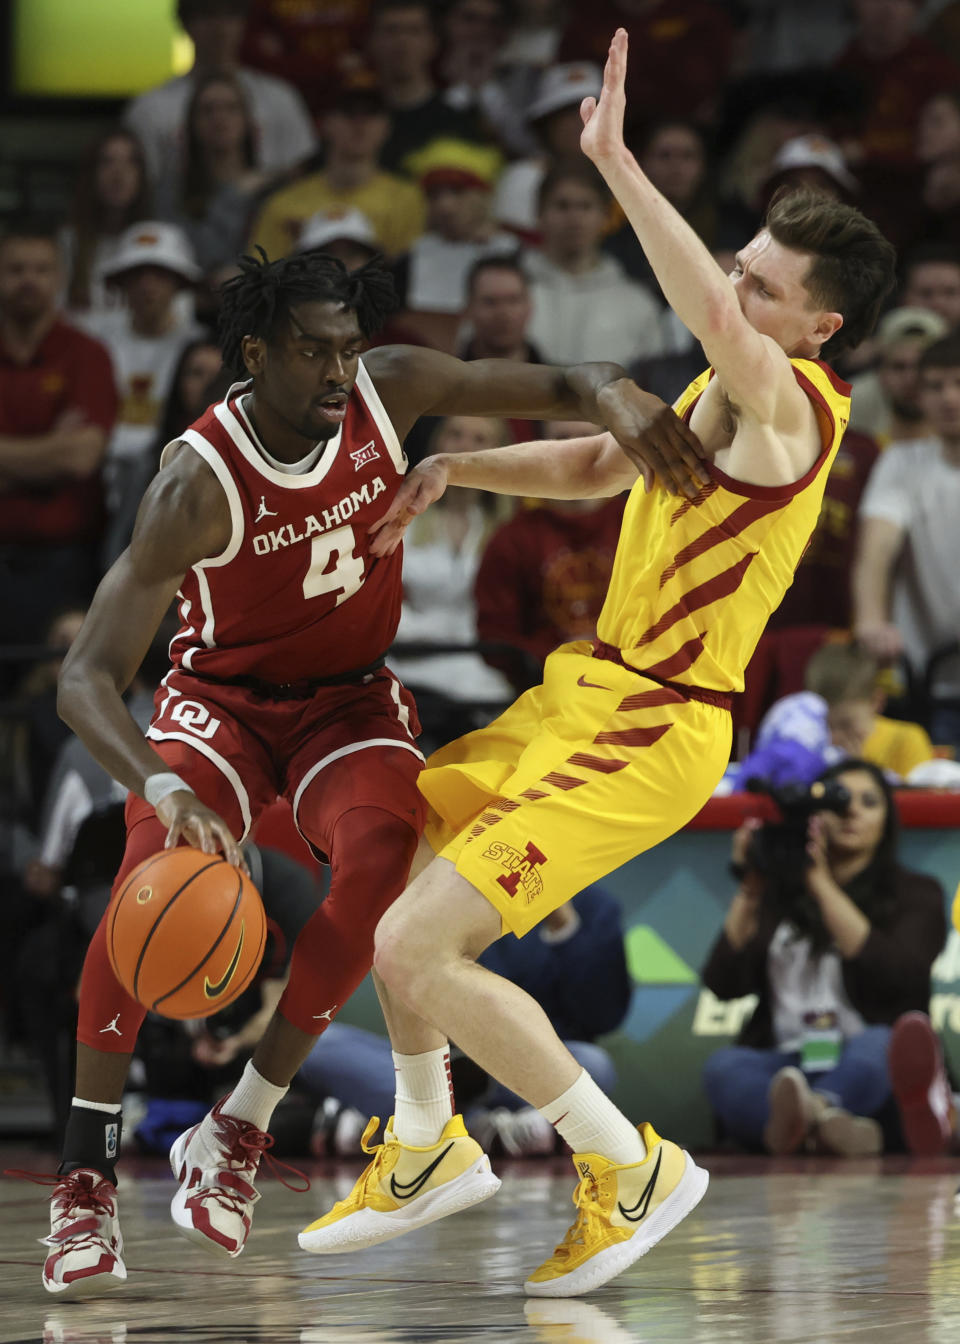 Oklahoma guard Joe Bamisile (4) pushes Iowa State guard Caleb Grill (2) out of his way as he tries to drive the ball during the first half of an NCAA college basketball game, Saturday, Feb. 25, 2023, in Ames, Iowa. (AP Photo/Justin Hayworth)